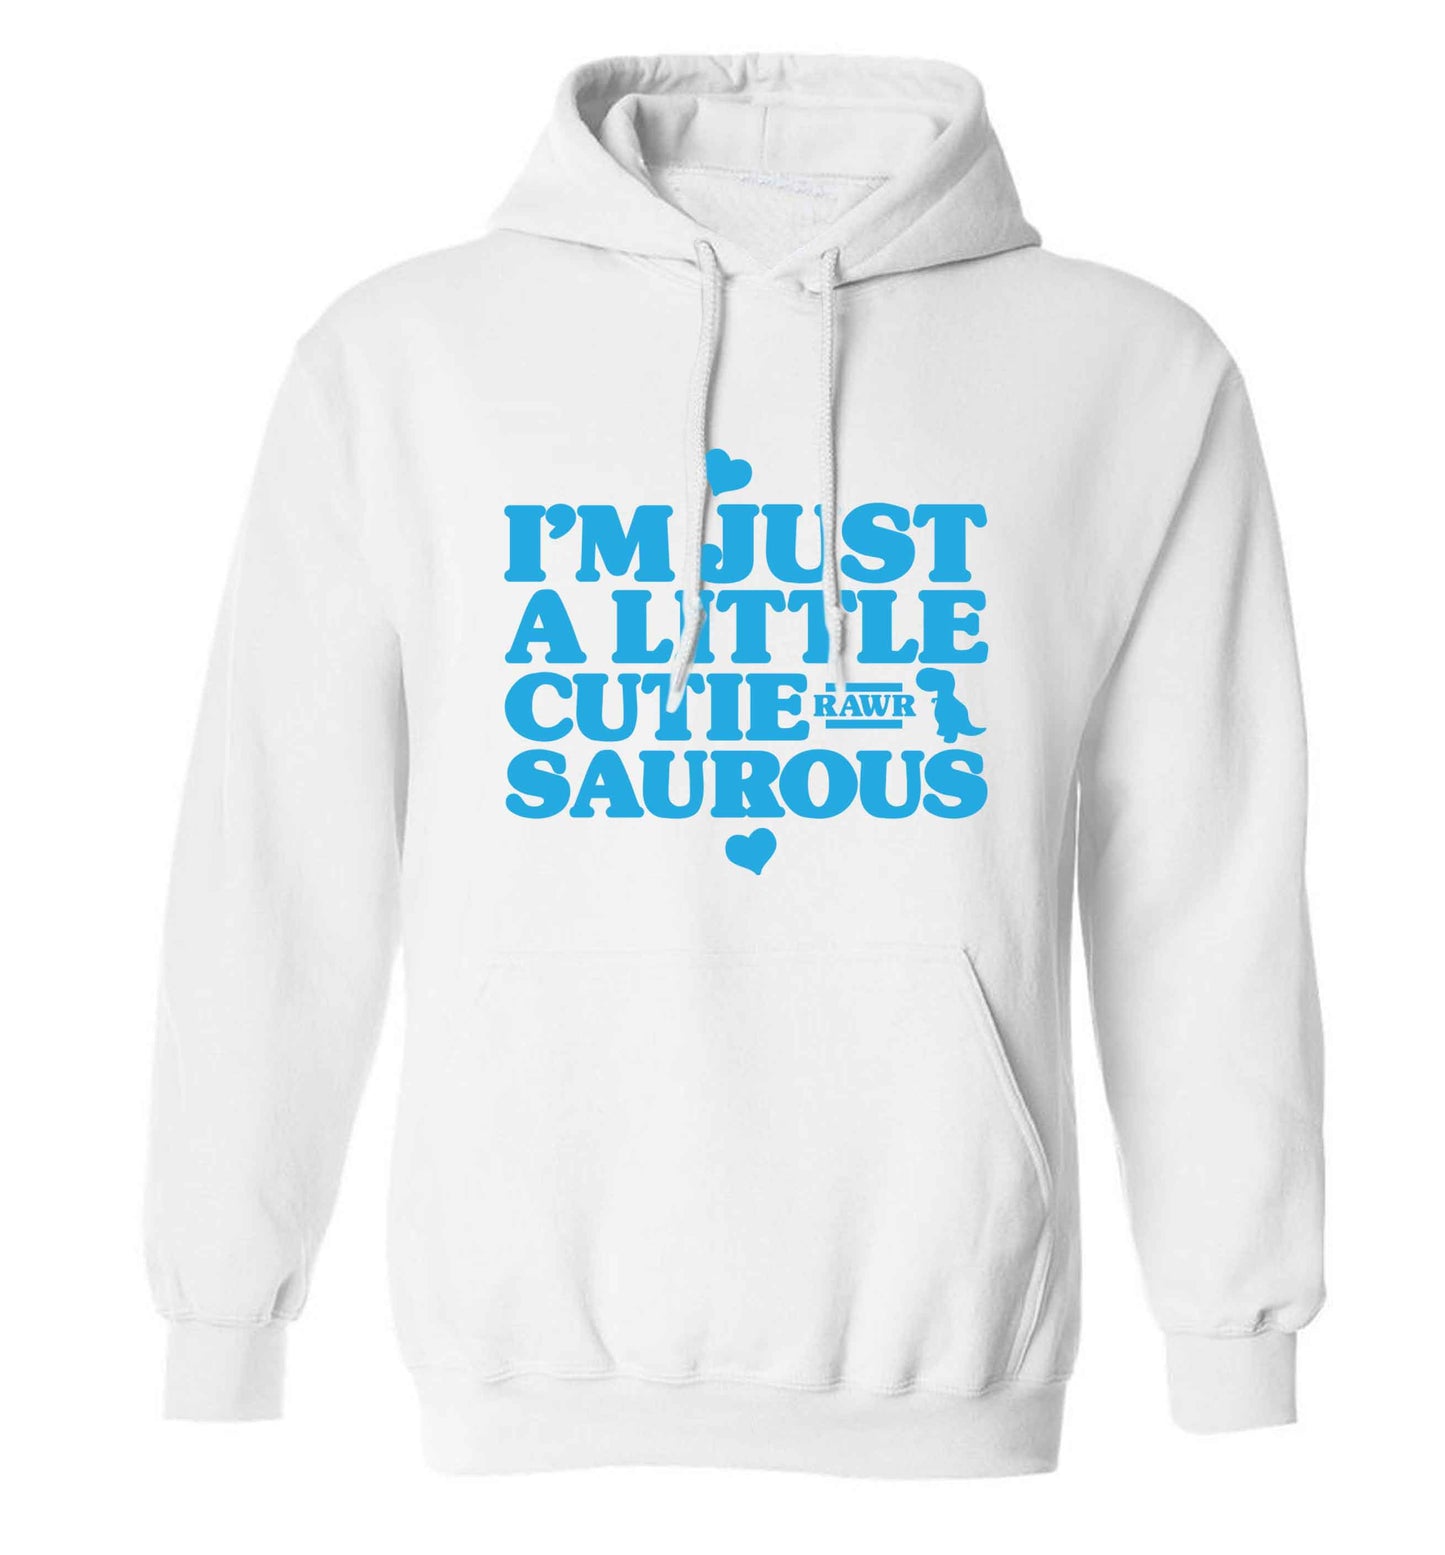 I'm just a little cutiesaurous adults unisex white hoodie 2XL